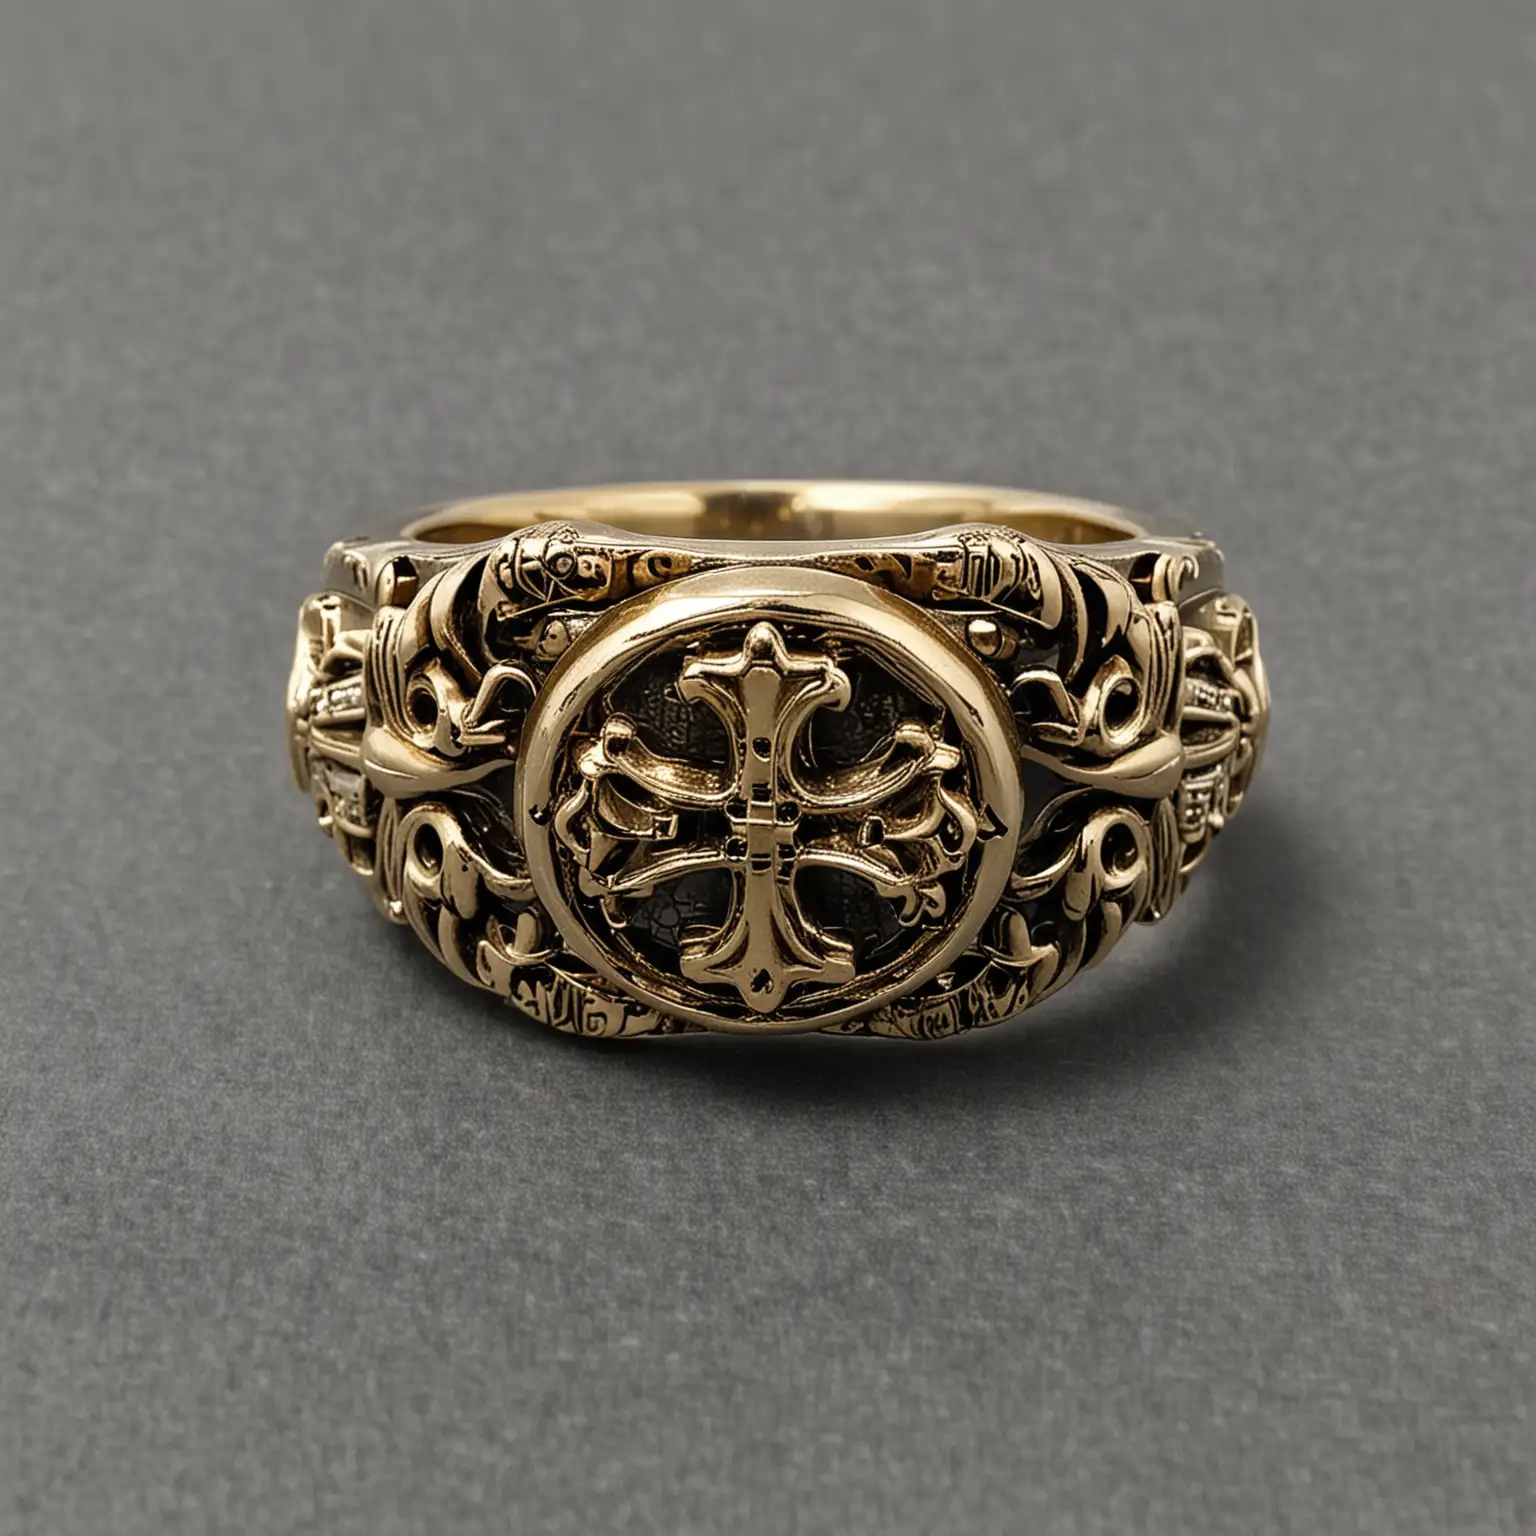 Luxurious Chrome Hearts Styled Antique Gold Ring Design